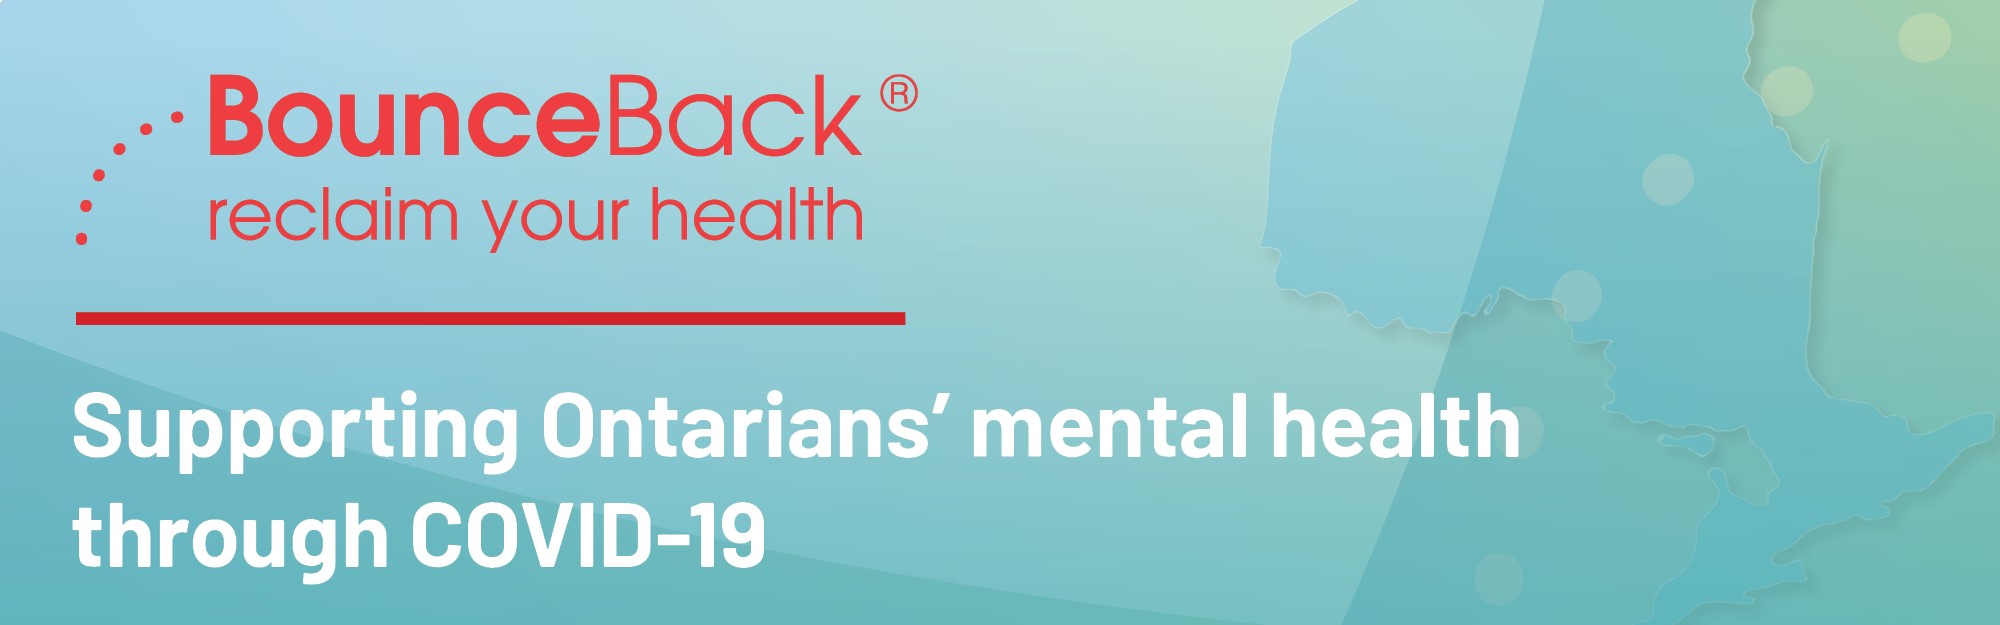 CMHA’s BounceBack key part of expanded mental health supports available to all Ontarians during COVID-19 pandemic